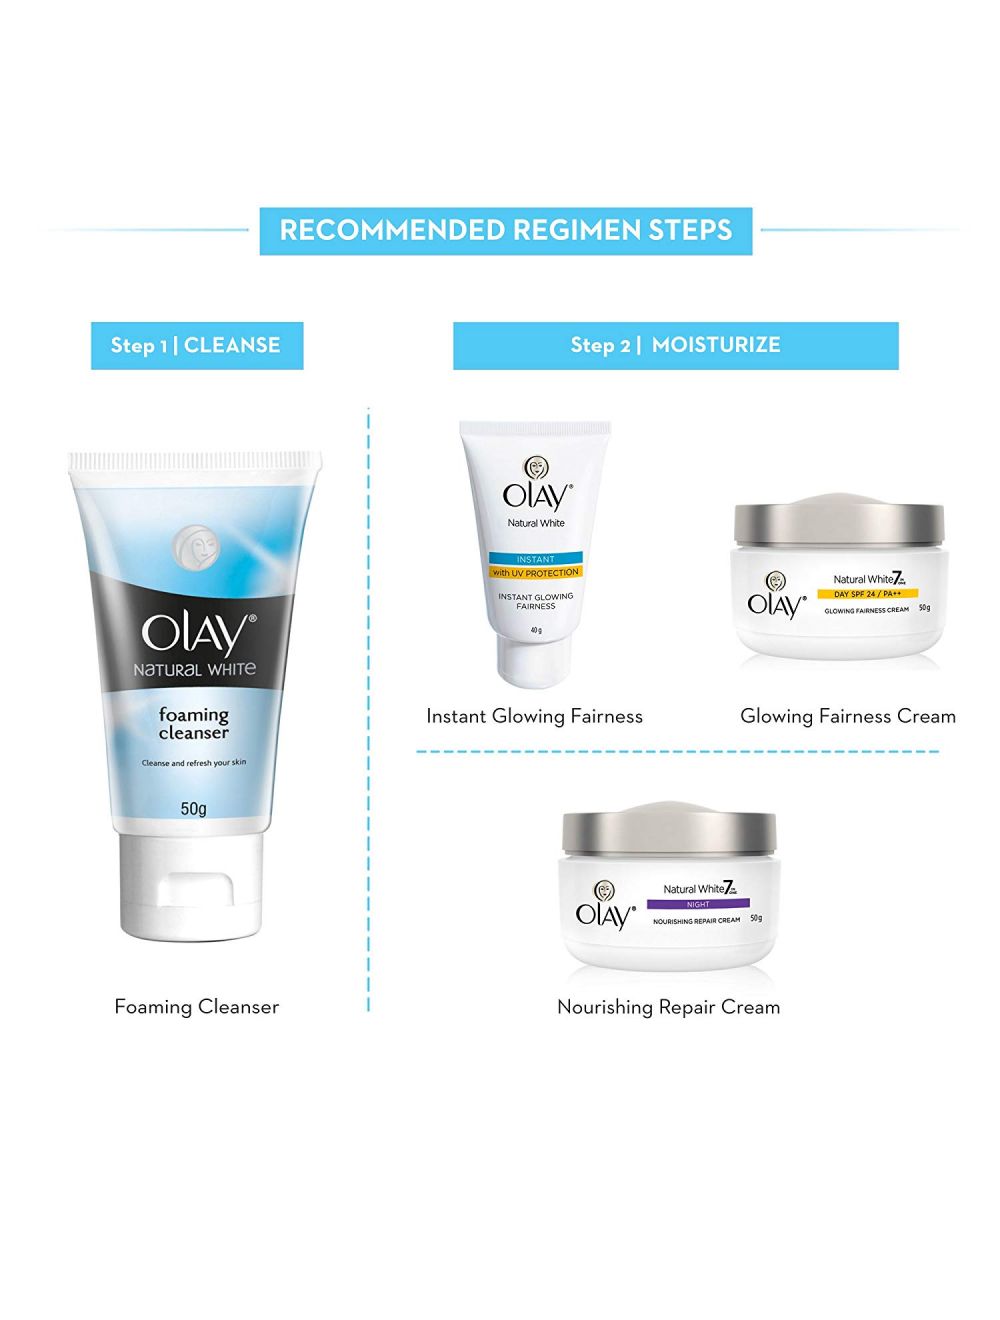 Olay Natural White Light Instant Glowing Fairness Cream (20gm)